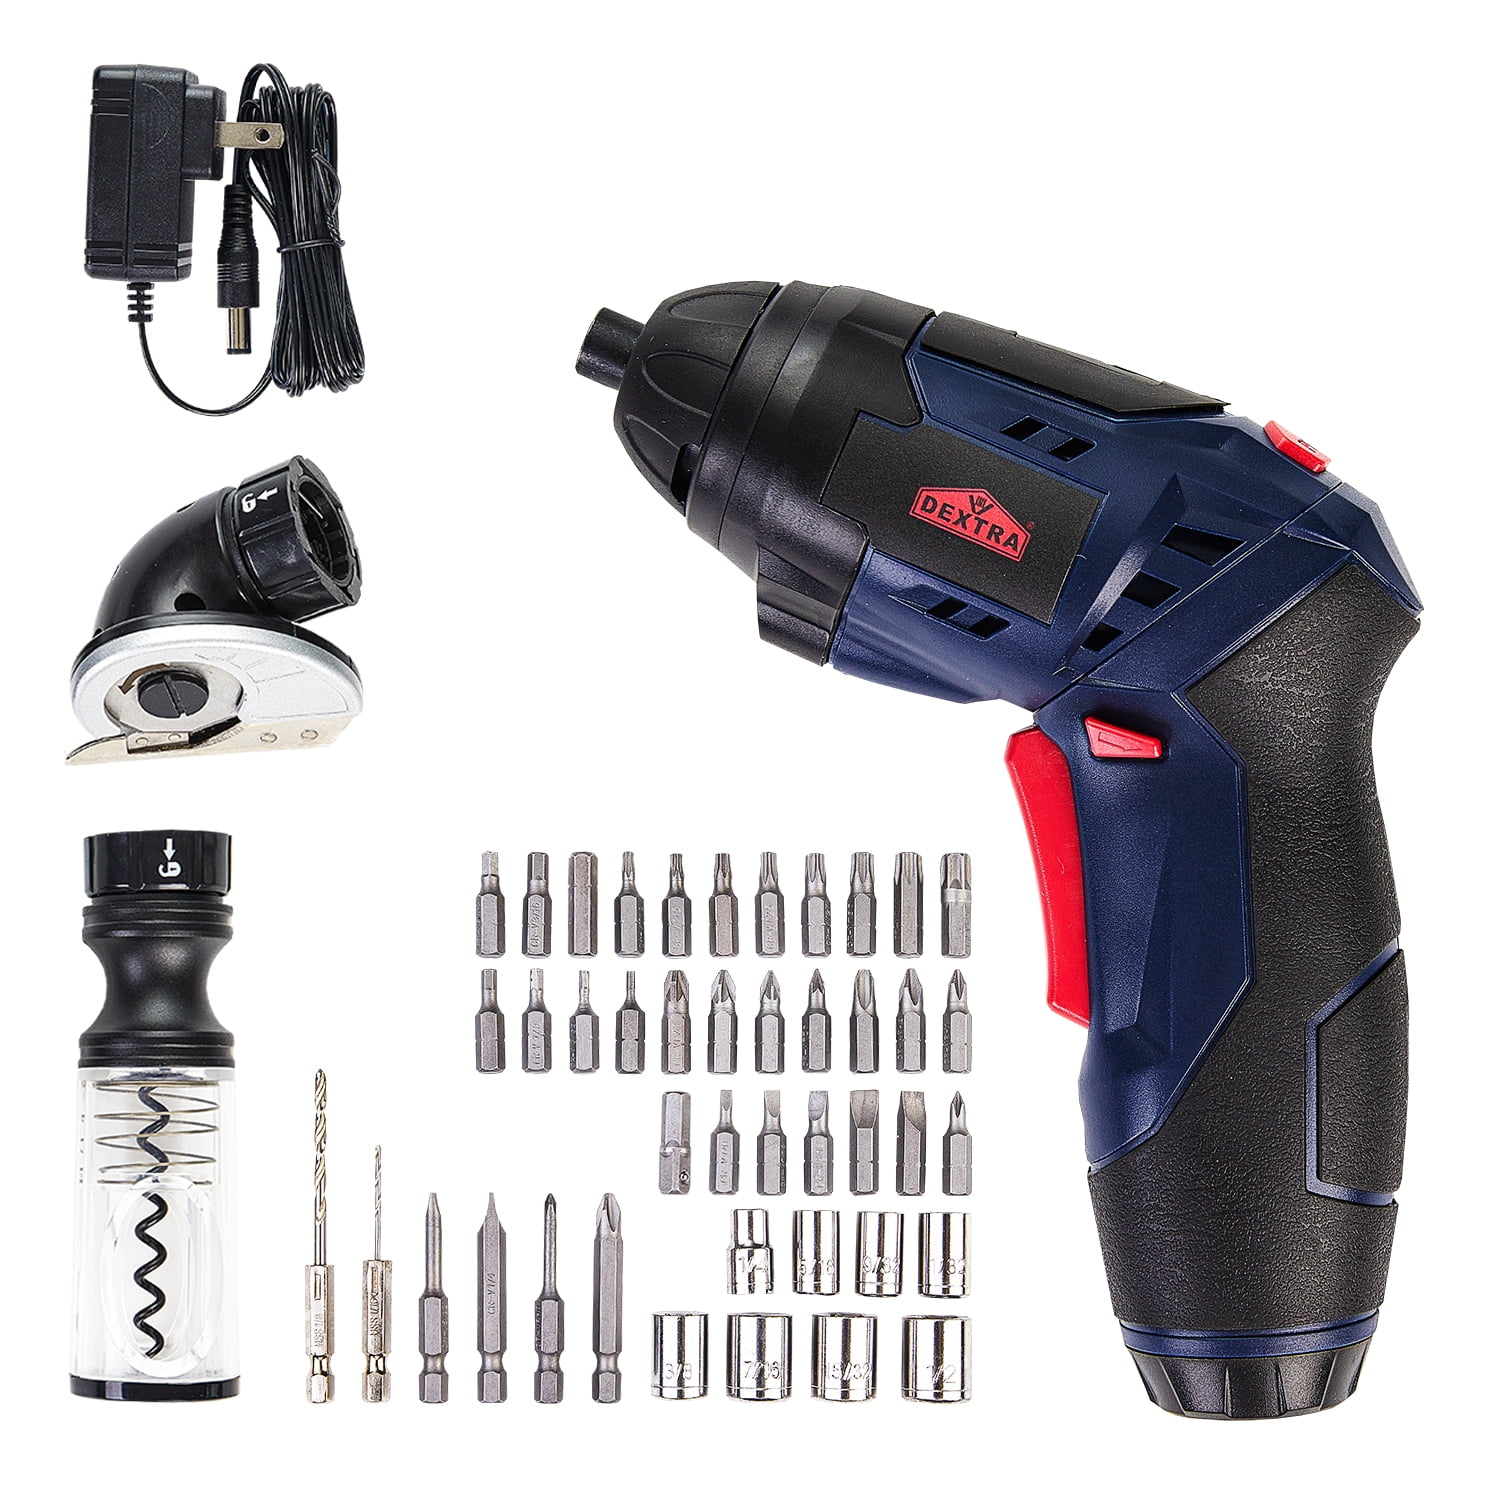 25 piece 4.8-Volt Cordless Screwdriver with LED - 6787673